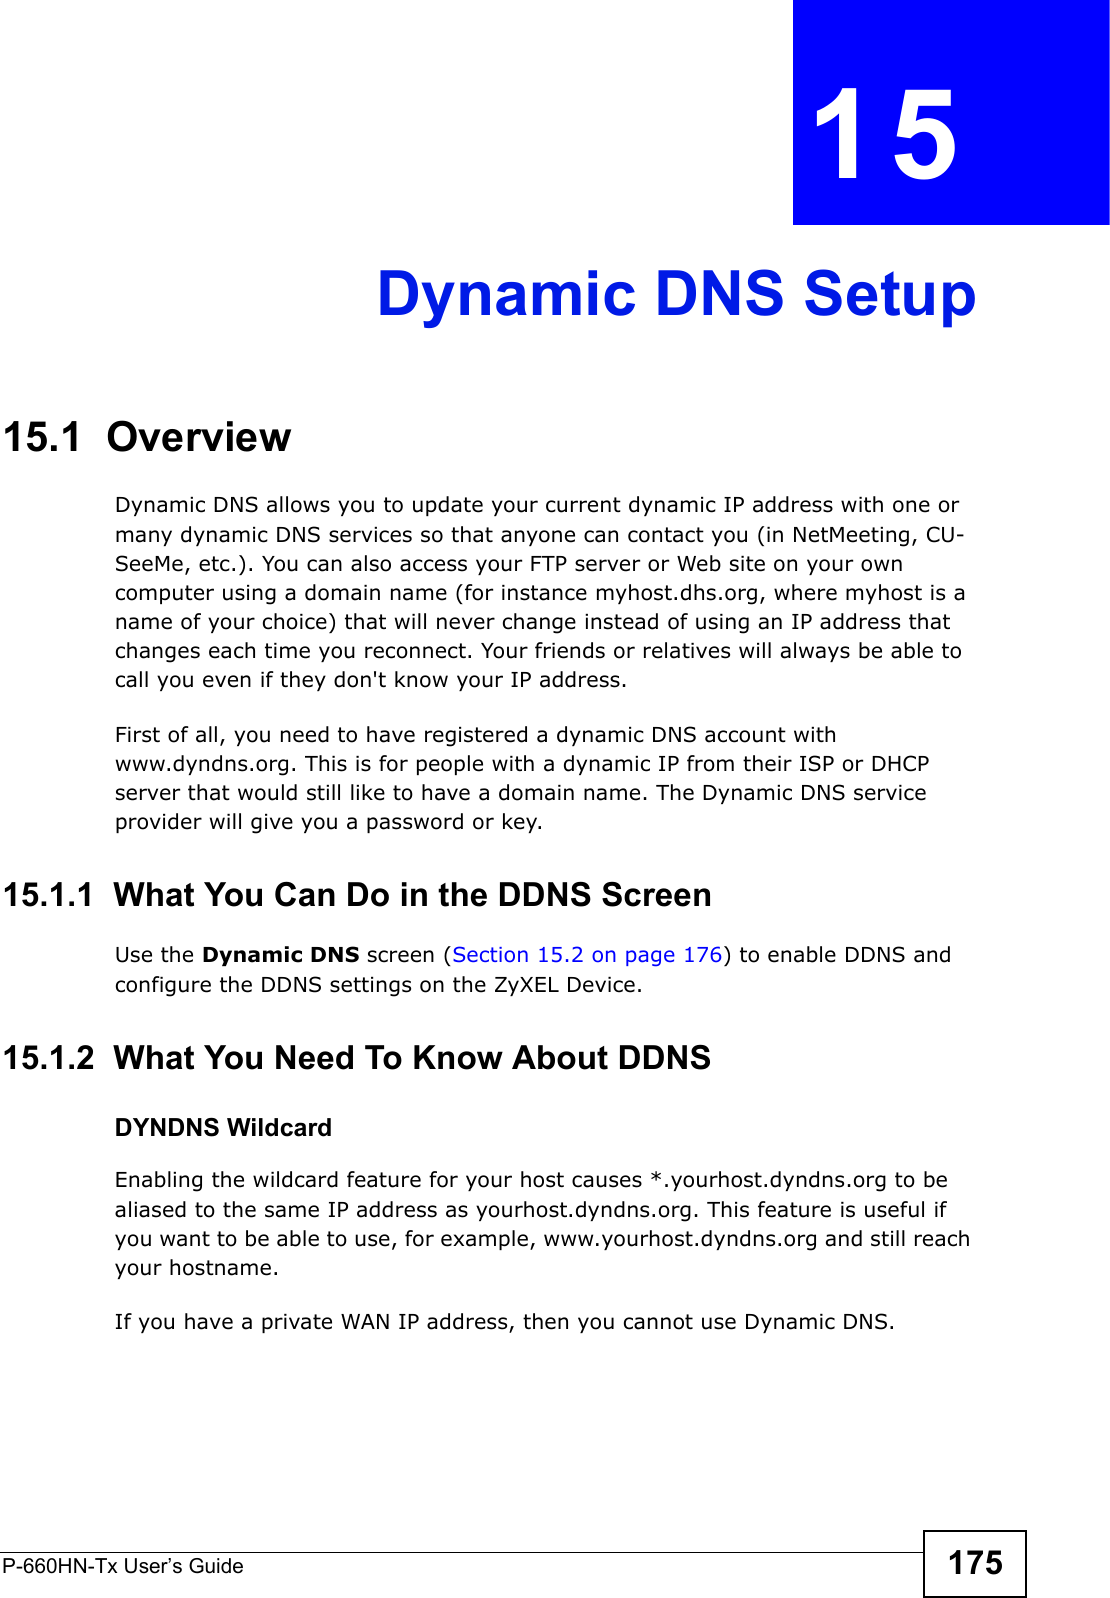 P-660HN-Tx User’s Guide 175CHAPTER  15 Dynamic DNS Setup15.1  Overview Dynamic DNS allows you to update your current dynamic IP address with one or many dynamic DNS services so that anyone can contact you (in NetMeeting, CU-SeeMe, etc.). You can also access your FTP server or Web site on your own computer using a domain name (for instance myhost.dhs.org, where myhost is a name of your choice) that will never change instead of using an IP address that changes each time you reconnect. Your friends or relatives will always be able to call you even if they don&apos;t know your IP address.First of all, you need to have registered a dynamic DNS account with www.dyndns.org. This is for people with a dynamic IP from their ISP or DHCP server that would still like to have a domain name. The Dynamic DNS service provider will give you a password or key. 15.1.1  What You Can Do in the DDNS ScreenUse the Dynamic DNS screen (Section 15.2 on page 176) to enable DDNS and configure the DDNS settings on the ZyXEL Device.15.1.2  What You Need To Know About DDNSDYNDNS WildcardEnabling the wildcard feature for your host causes *.yourhost.dyndns.org to be aliased to the same IP address as yourhost.dyndns.org. This feature is useful if you want to be able to use, for example, www.yourhost.dyndns.org and still reach your hostname.If you have a private WAN IP address, then you cannot use Dynamic DNS.